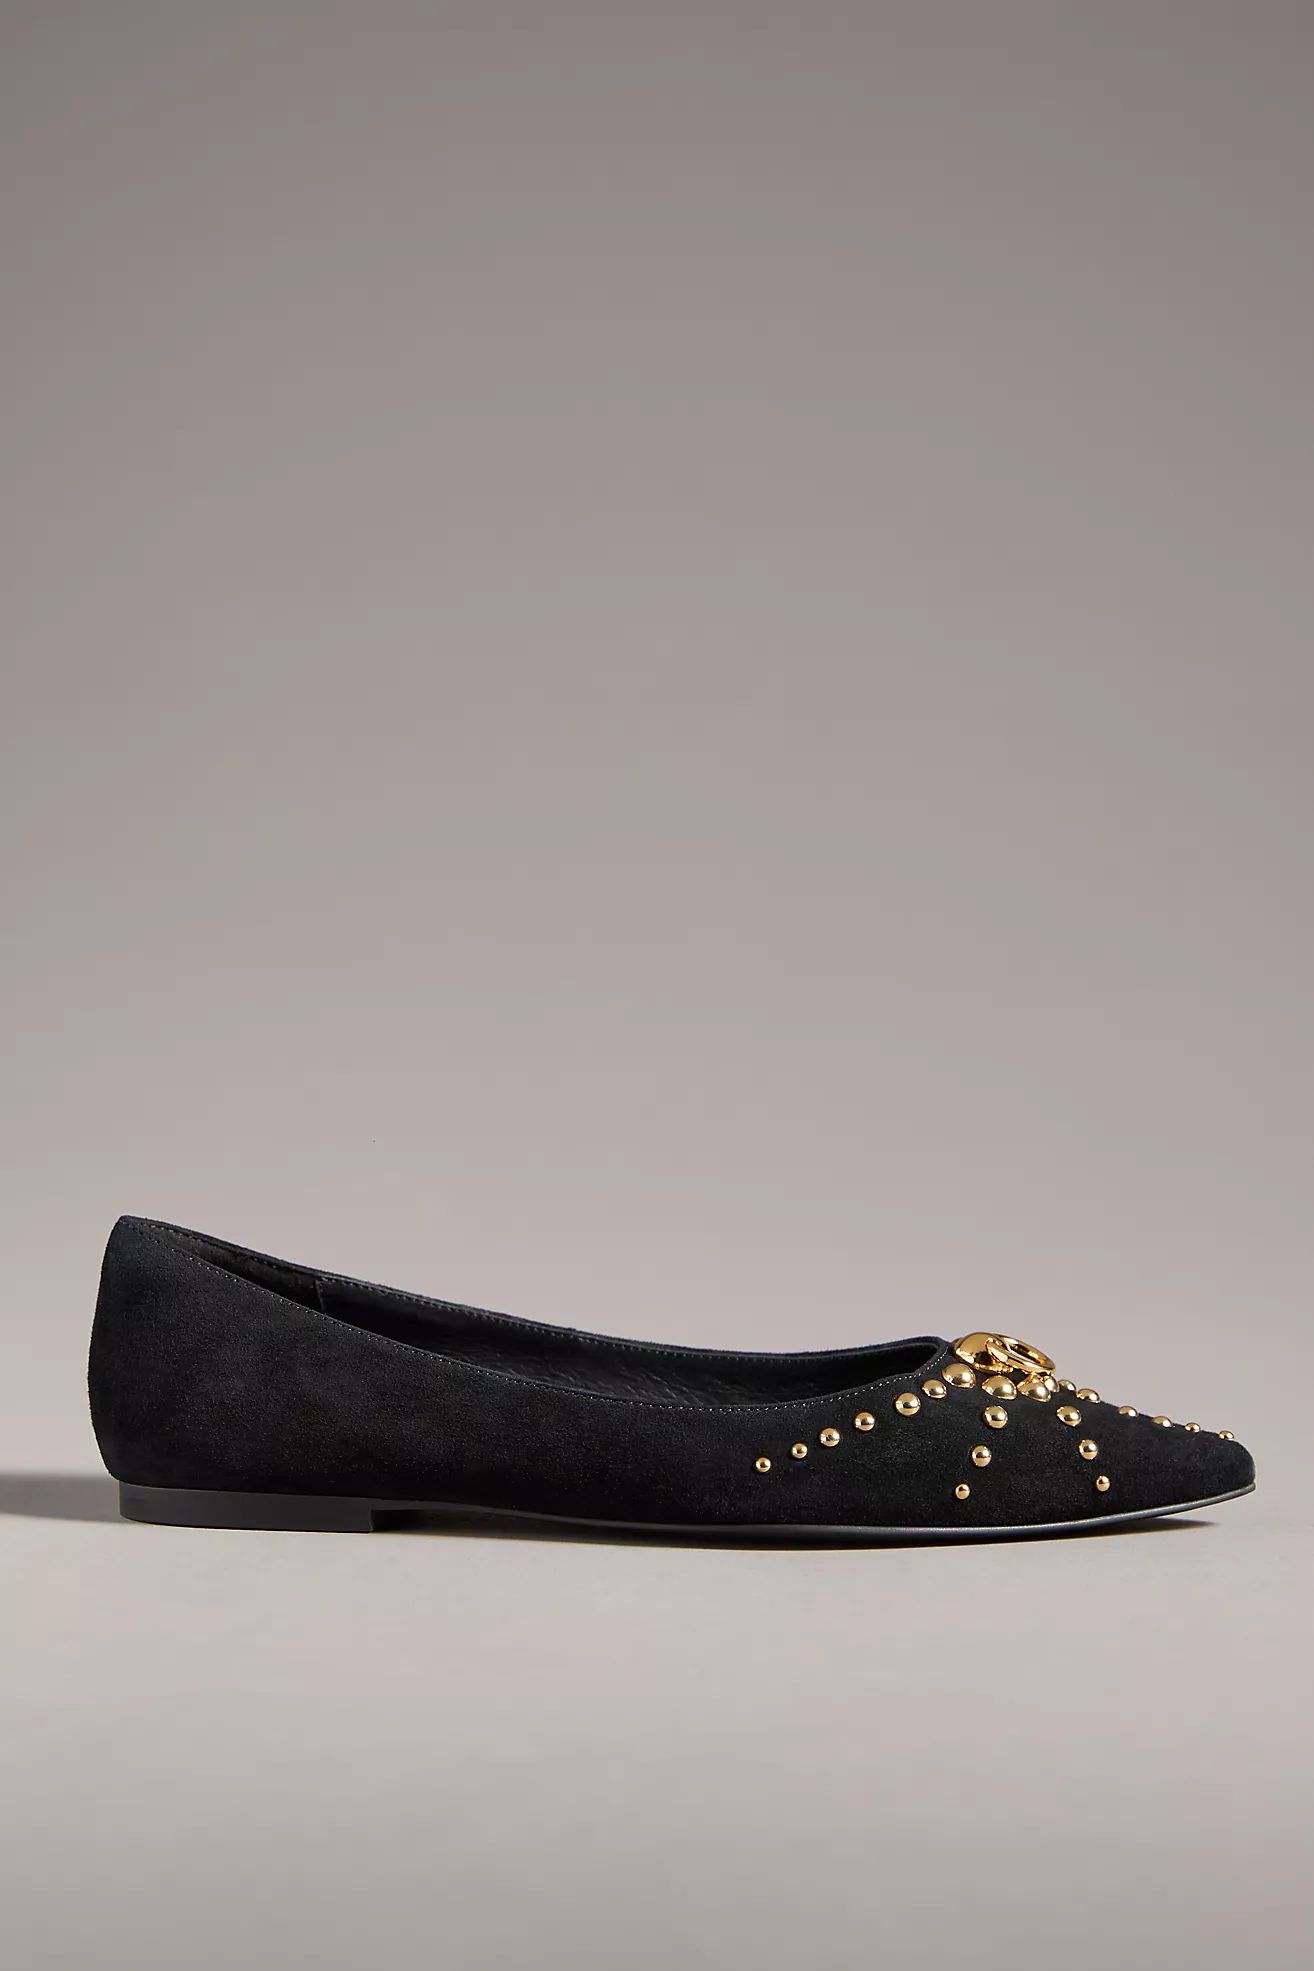 Jeffrey Campbell Appealing Flats | Anthropologie (US)